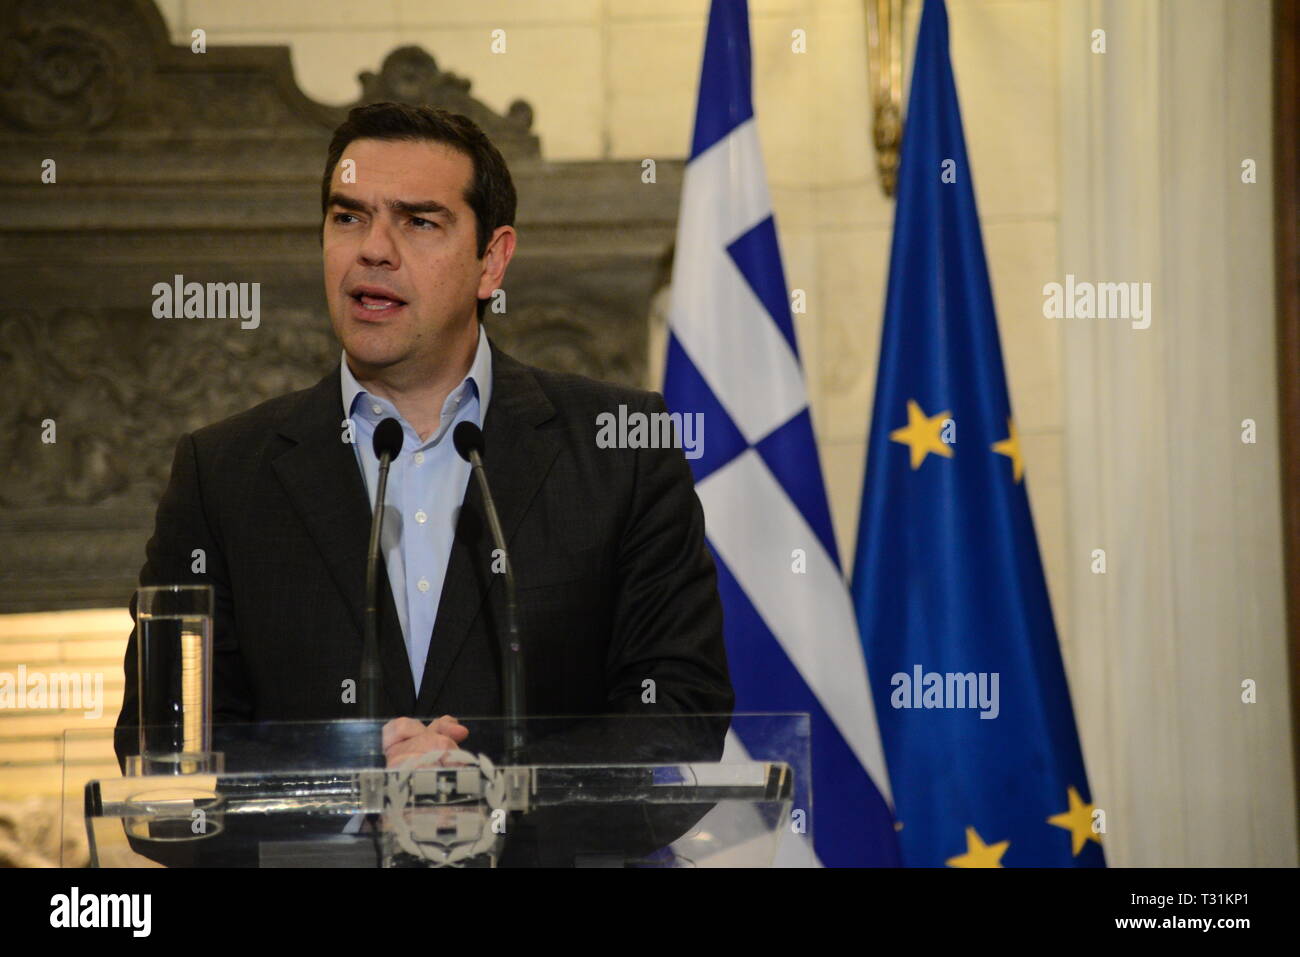 Greek Prime Minister Alexis Tsipras, during the meeting with Prime Minister of Denmark, Lars Løkke Rasmussen. (Photo by Dimitrios Karvountzis/Pacific Press) Stock Photo